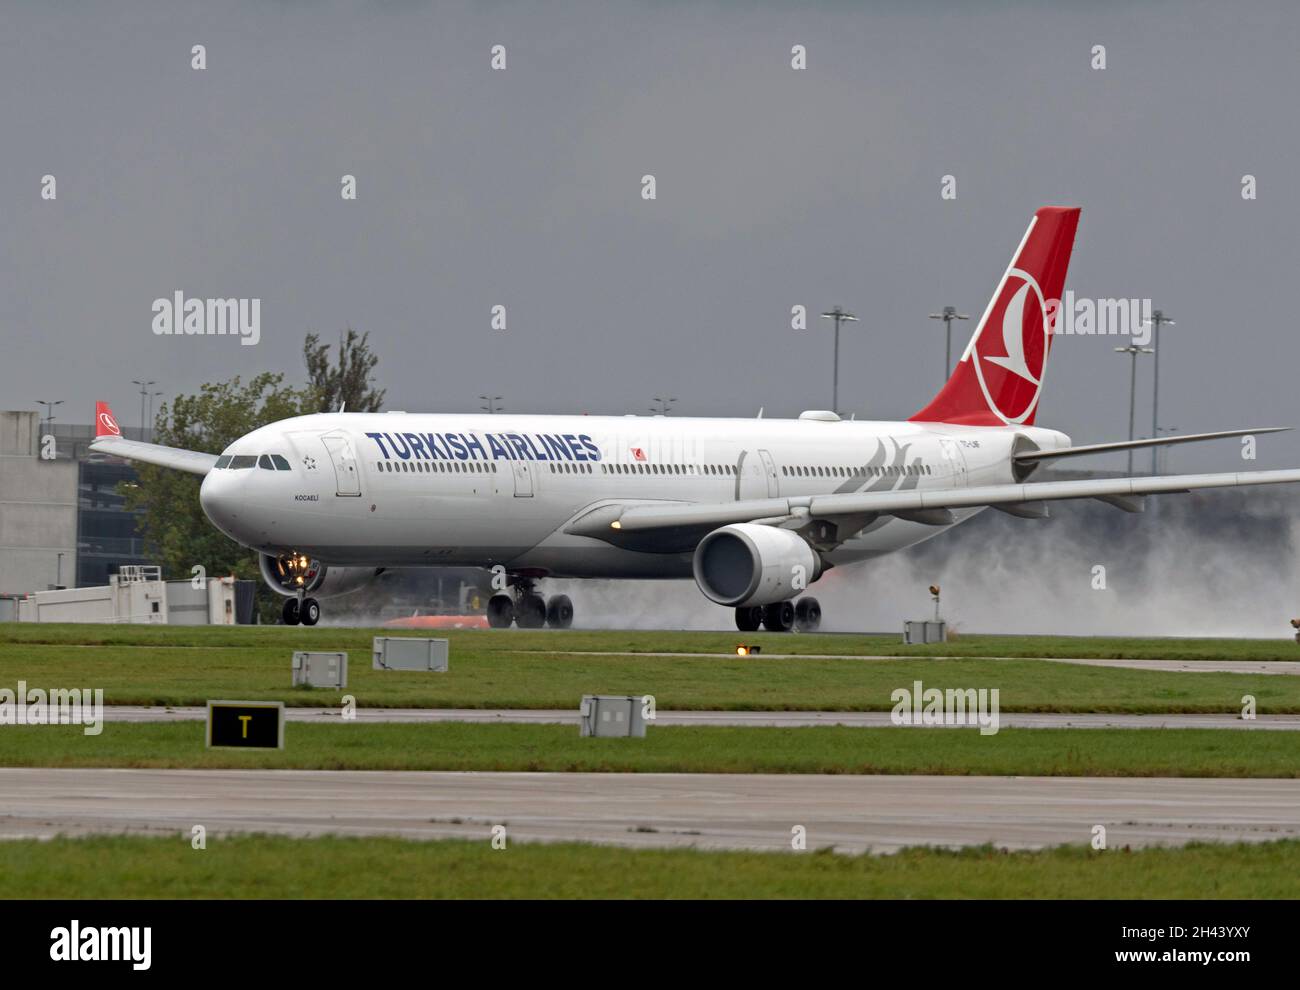 Turkish Airlines Airbus A330-303, TC-LNF,heading for take off at Manchester Airport Stock Photo